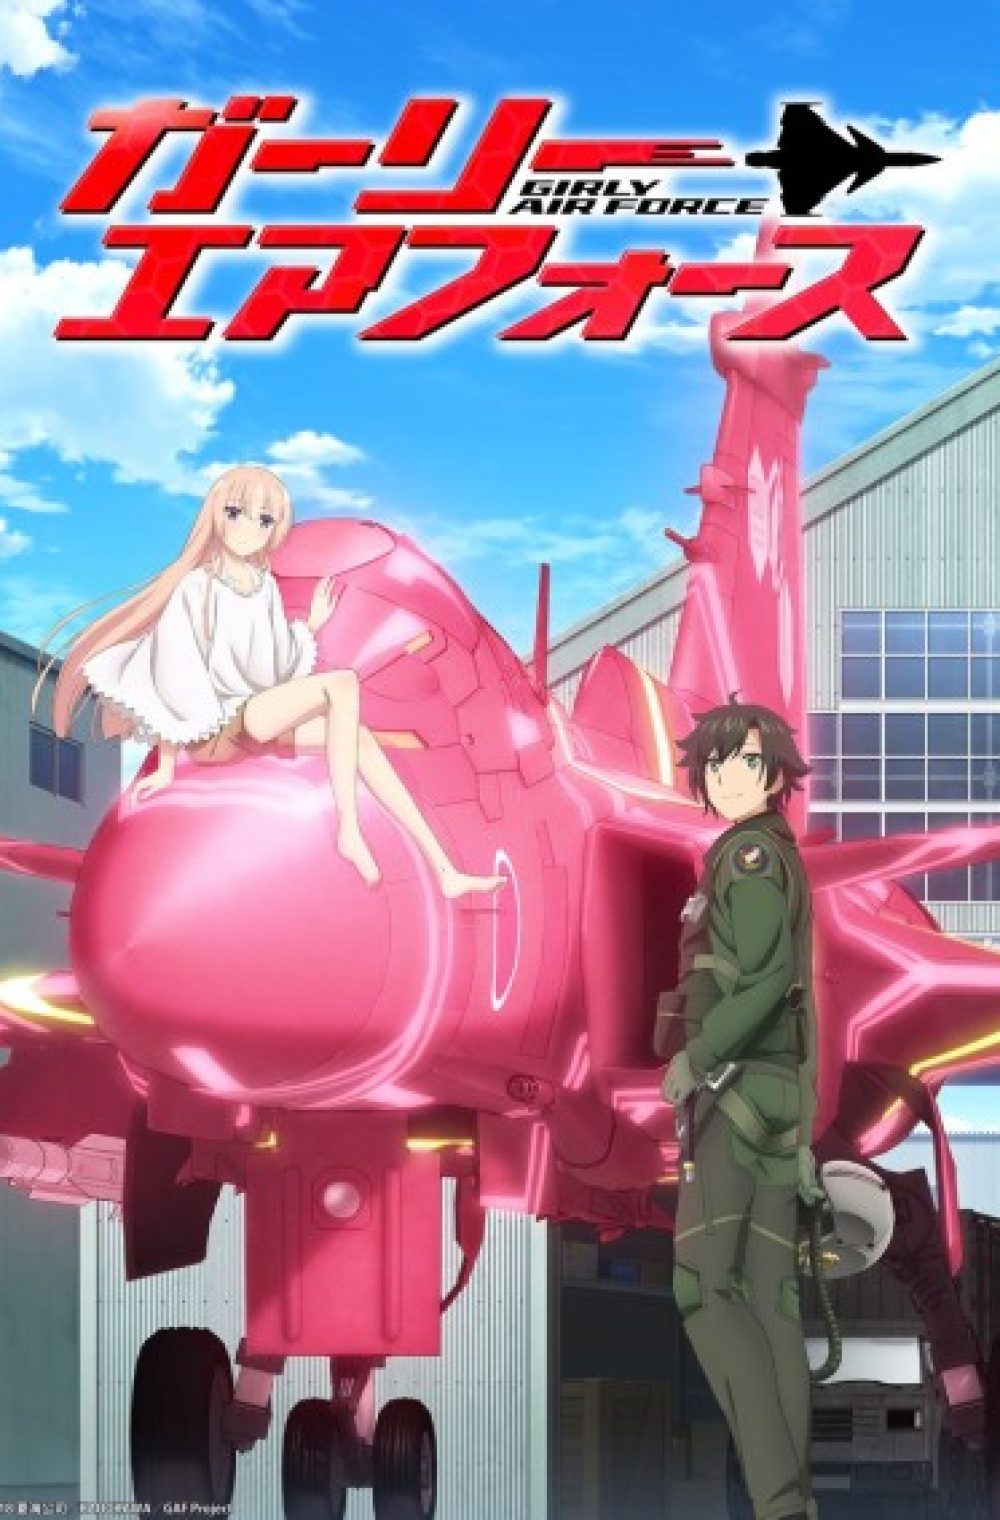 Girly Air Force (Bluray Ver.)